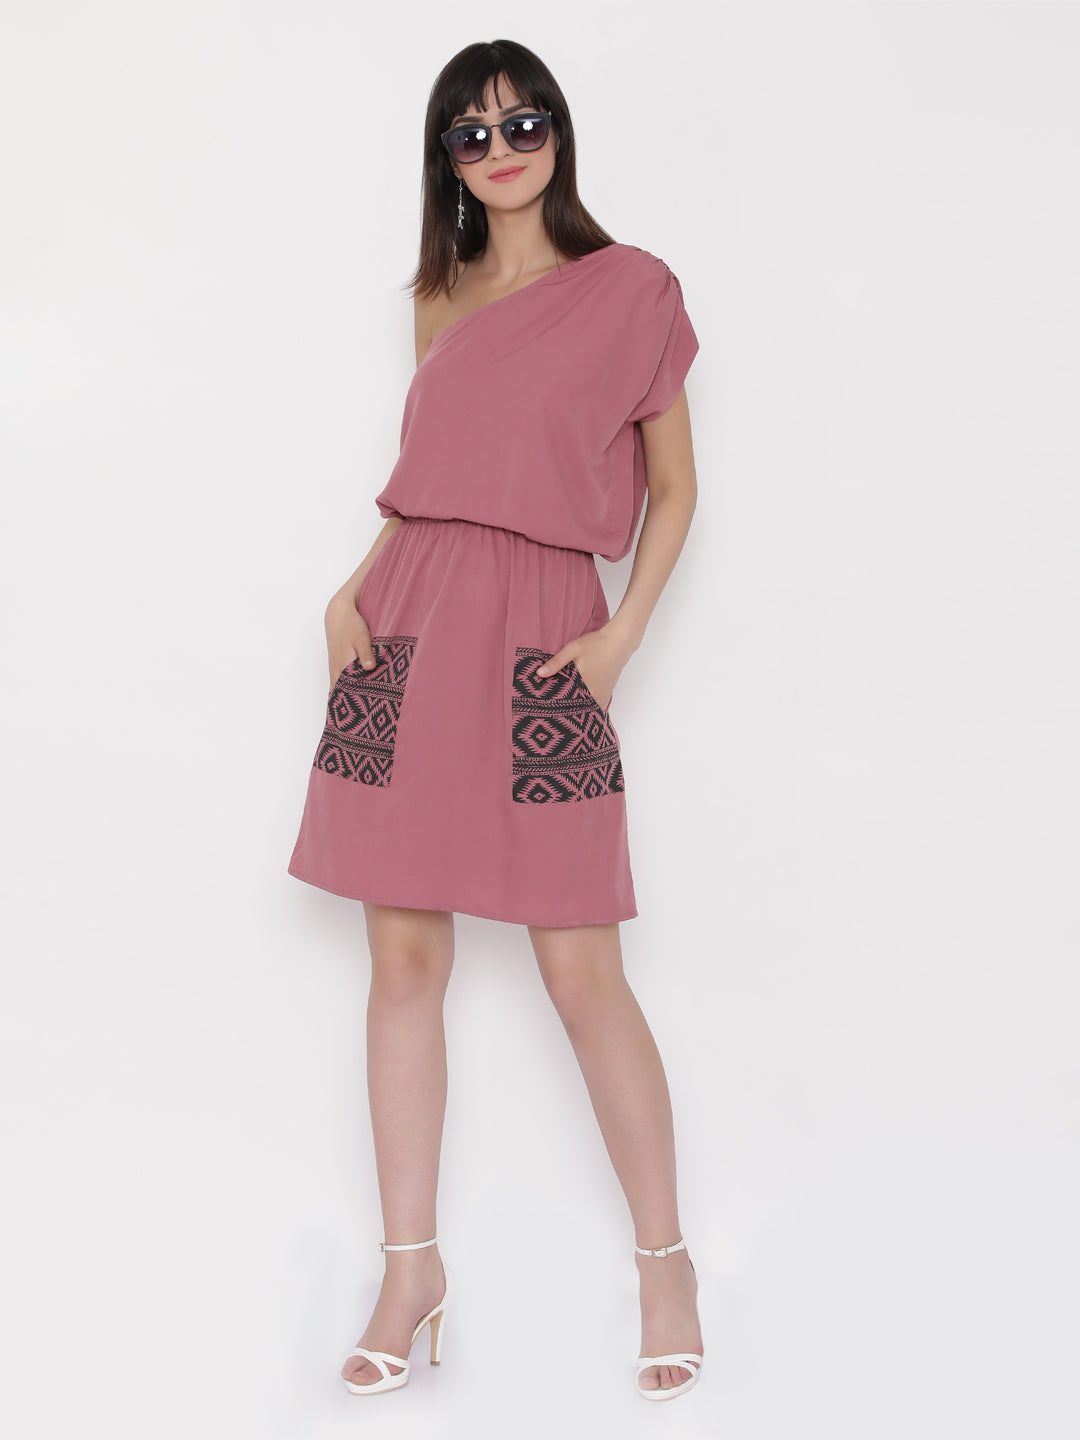 One shoulder Dress with blouson waist and patch pockets